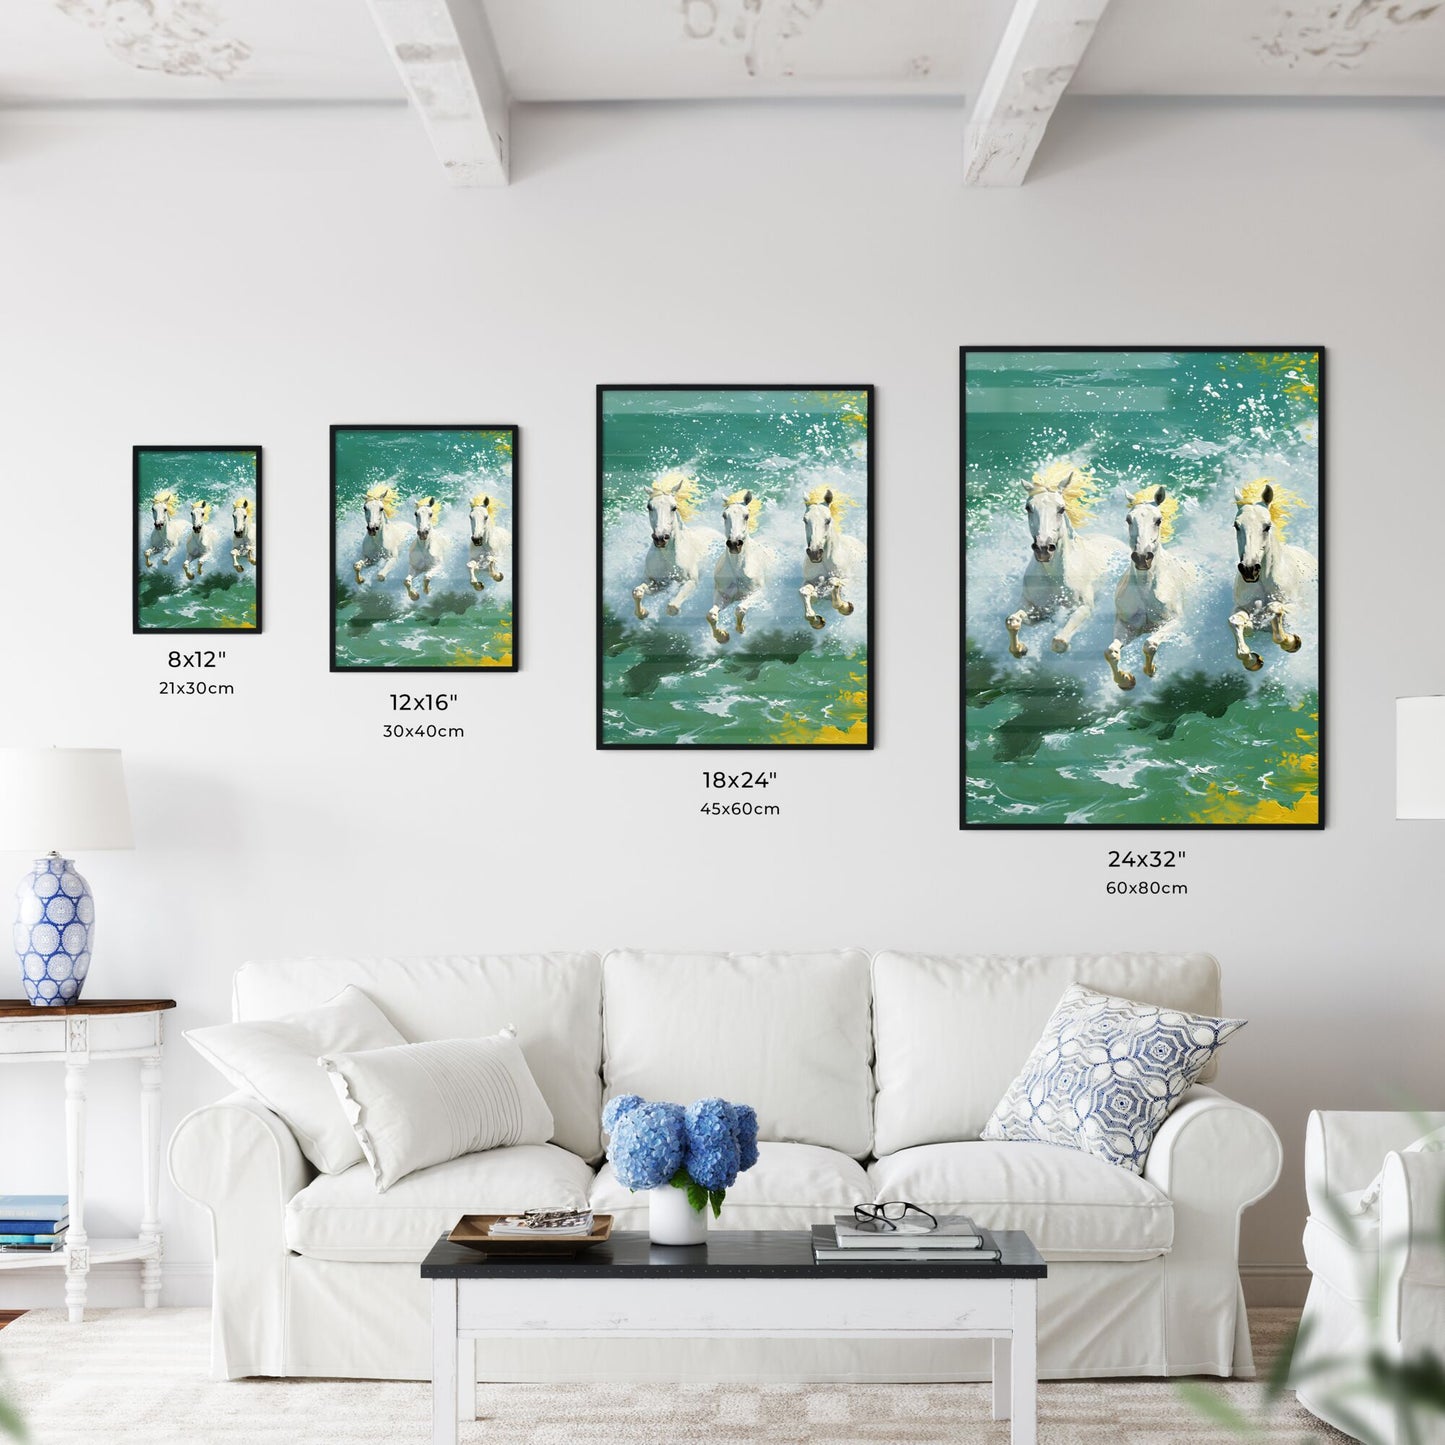 A Poster of showcase the beauty and spirit of horses - A Group Of White Horses Running Through Water Default Title